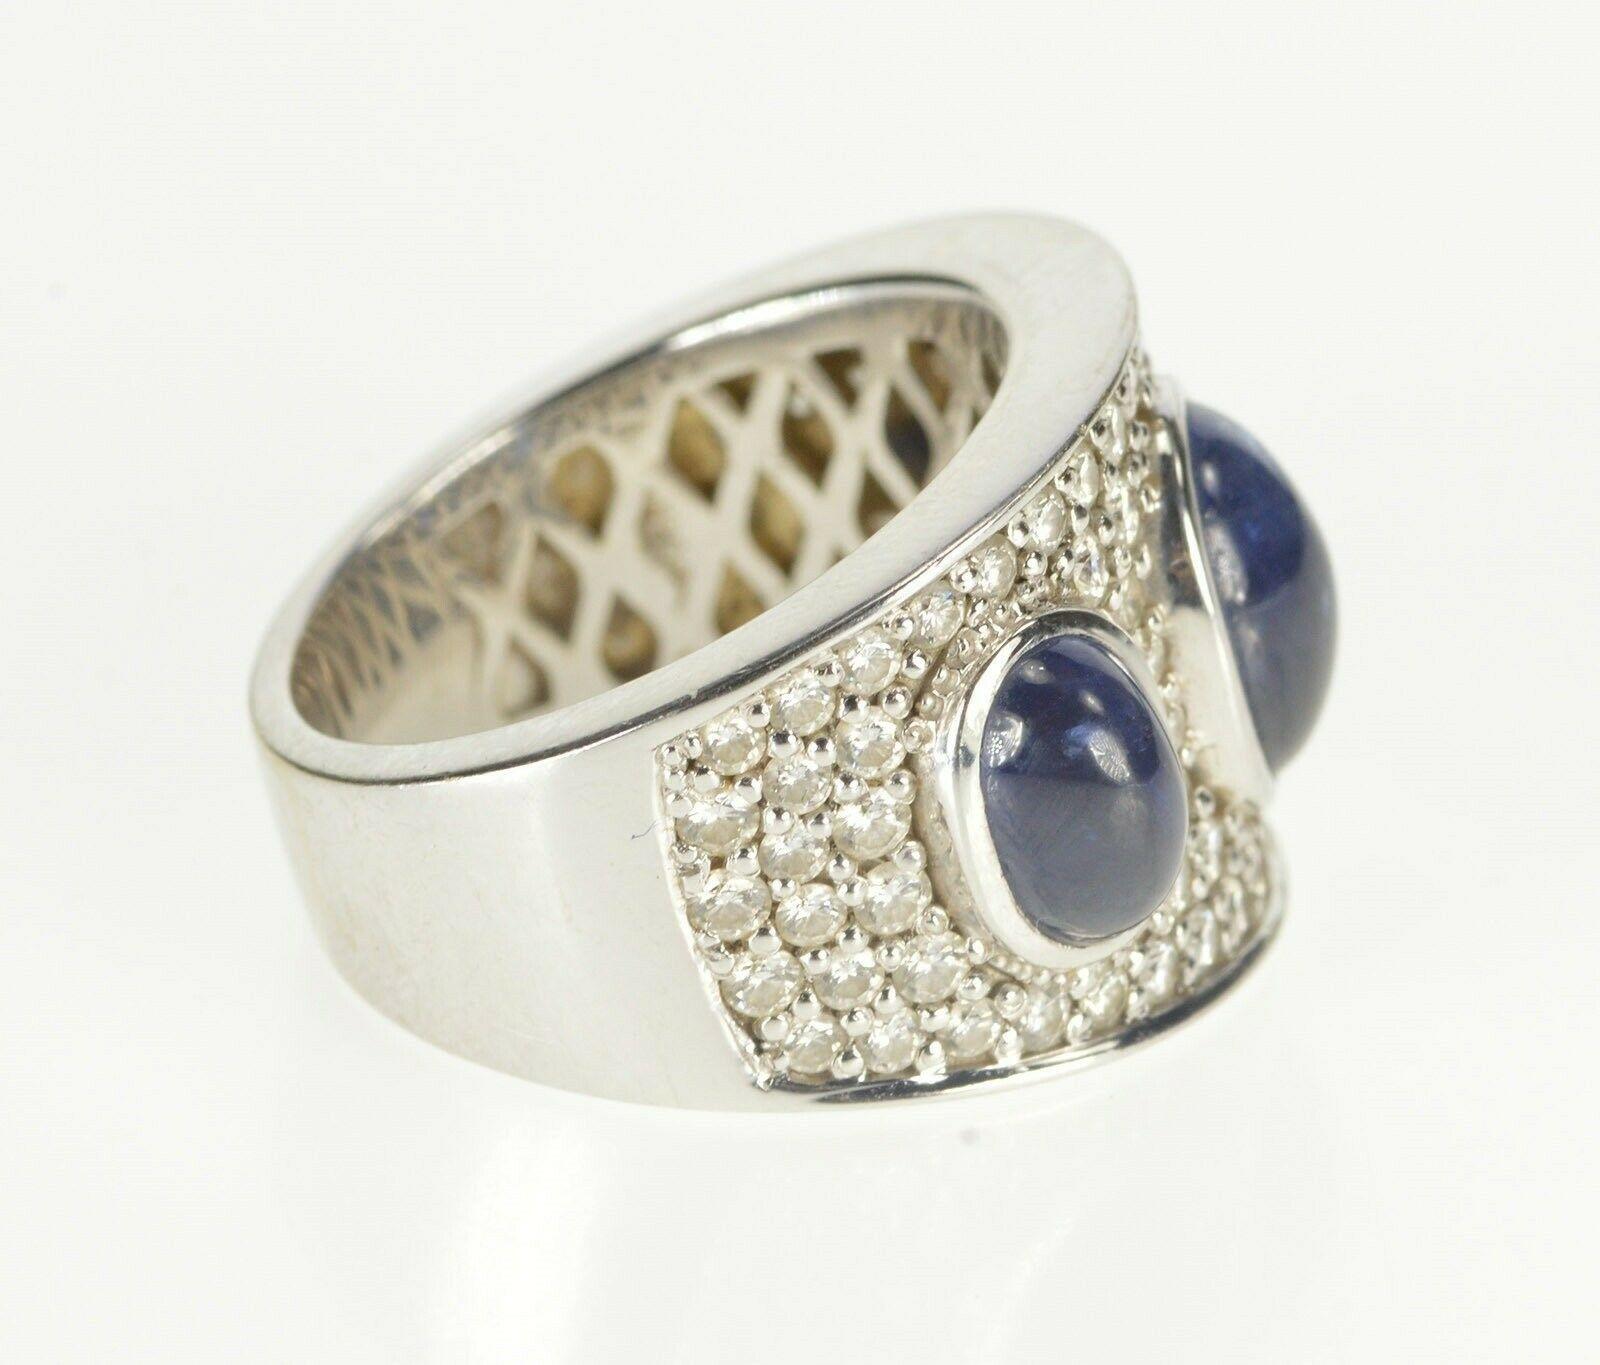 Almost 10 ctw sapphire and diamonds this classic band creates a bold statement. Currently a size 7.75, this ring is crafted out of 18k white gold. 

Gem Stone:  2.25 Ctw=74x Round Brilliant Cut Diamond 4.00 Ctw=2x Oval Cabochon Sapphire Side